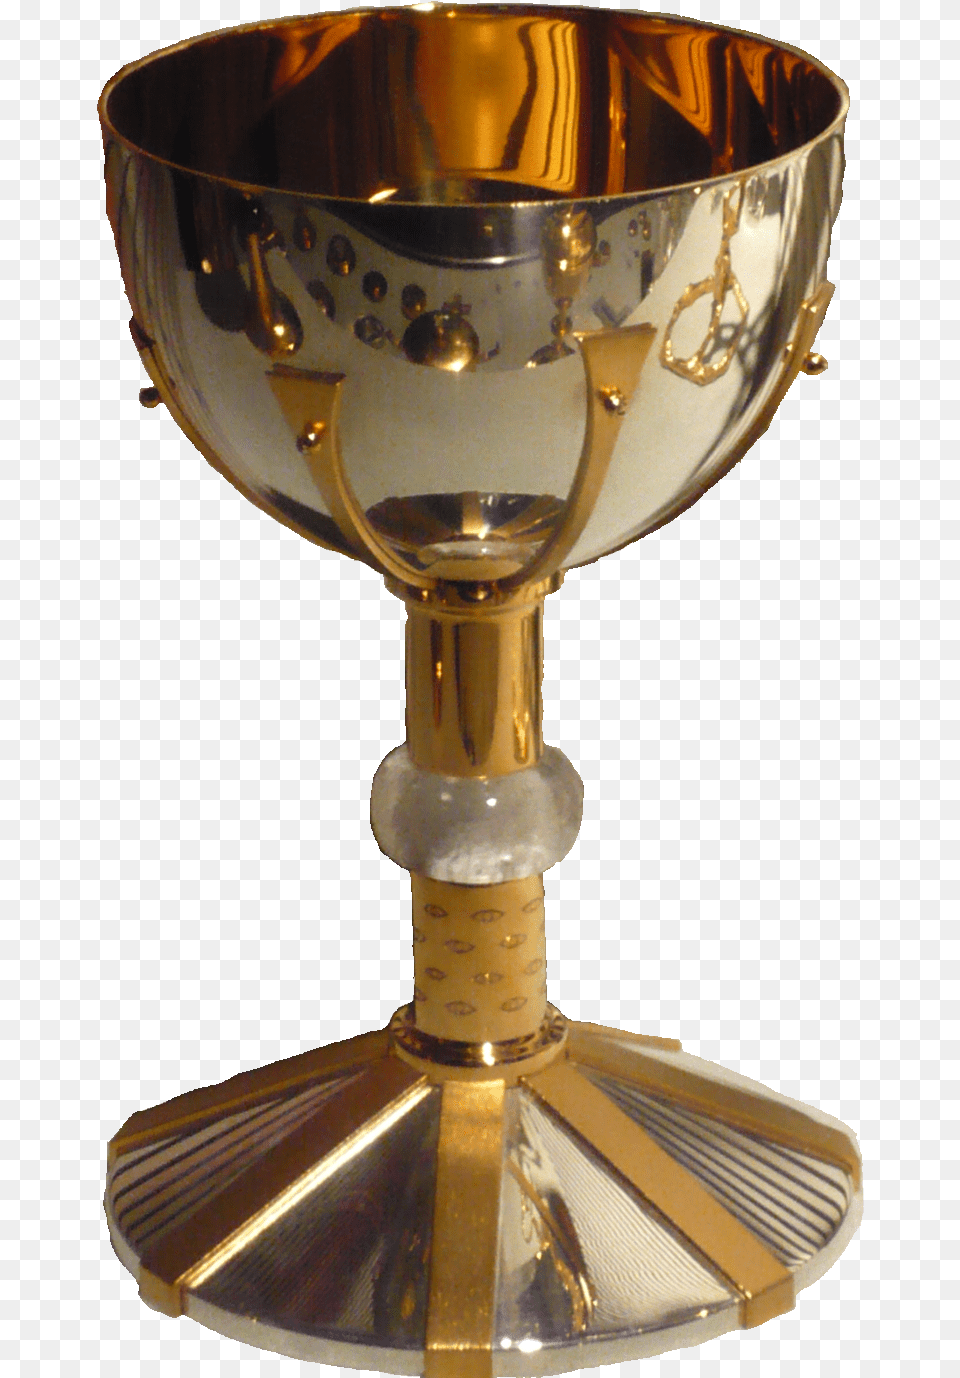 Holy Grail Chalice, Glass, Goblet, Trophy Png Image